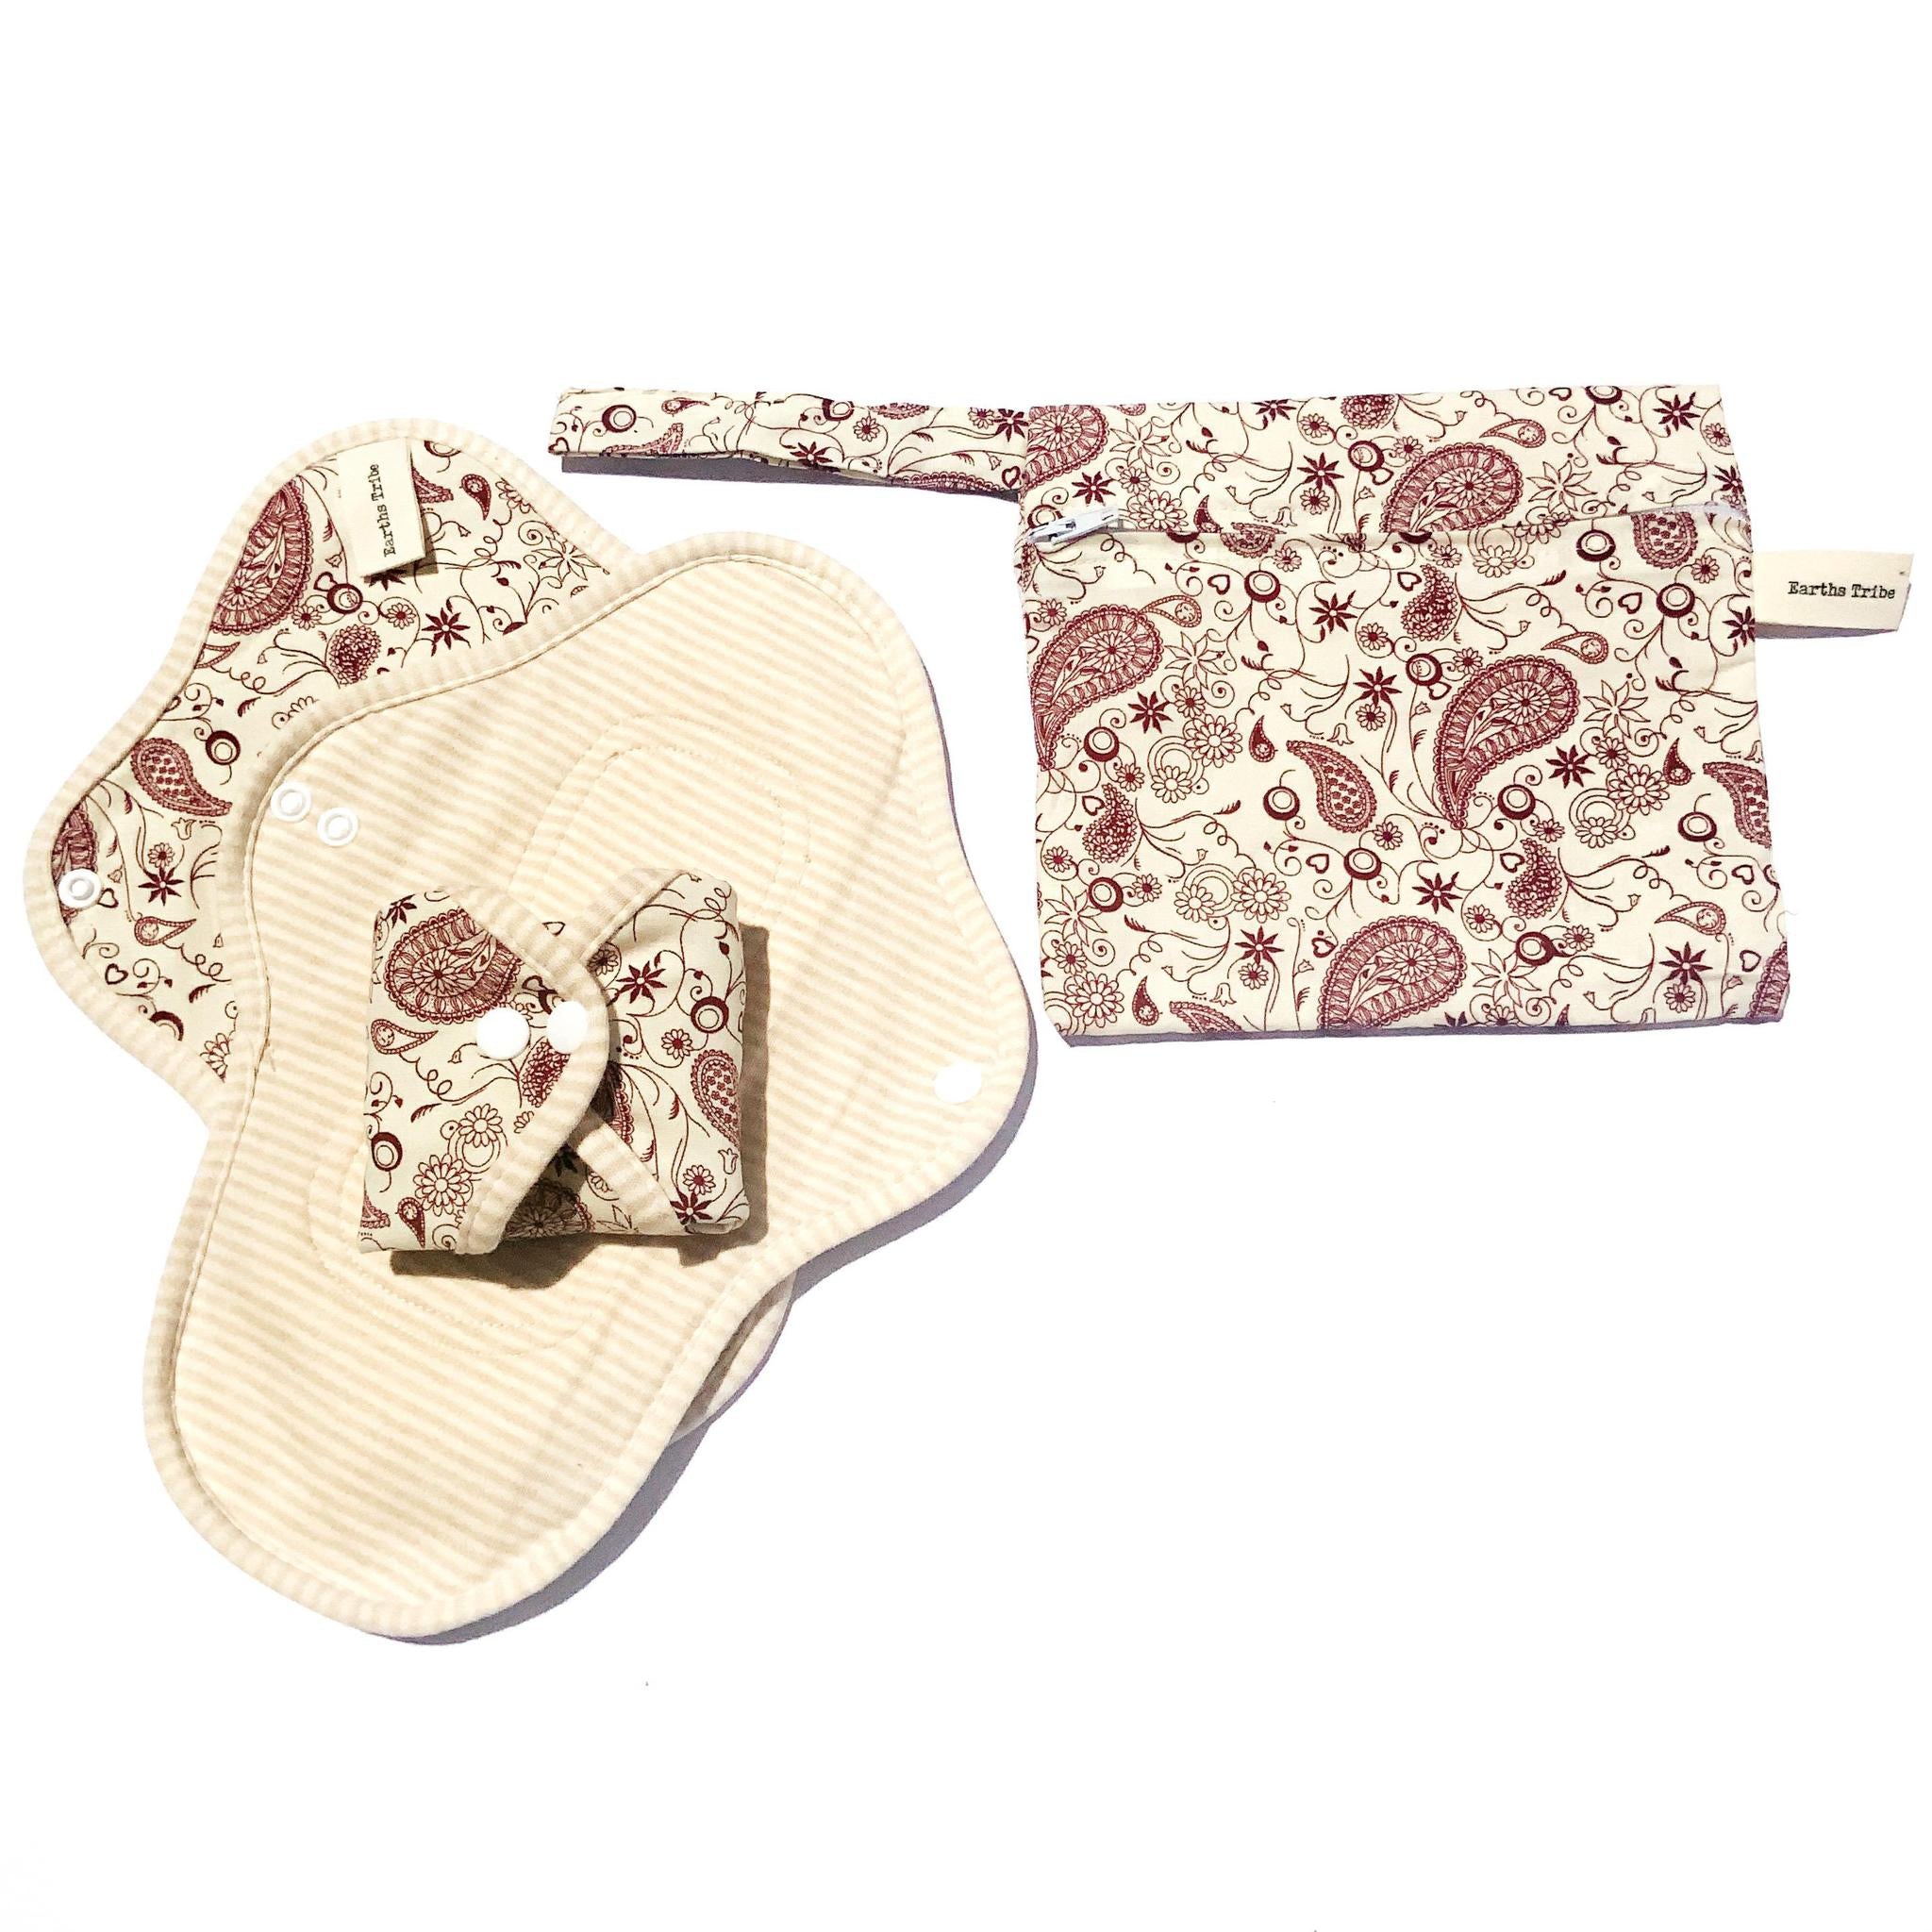 Earths Tribe | Reusable Organic Cotton Menstrual Pads | Red & Cream